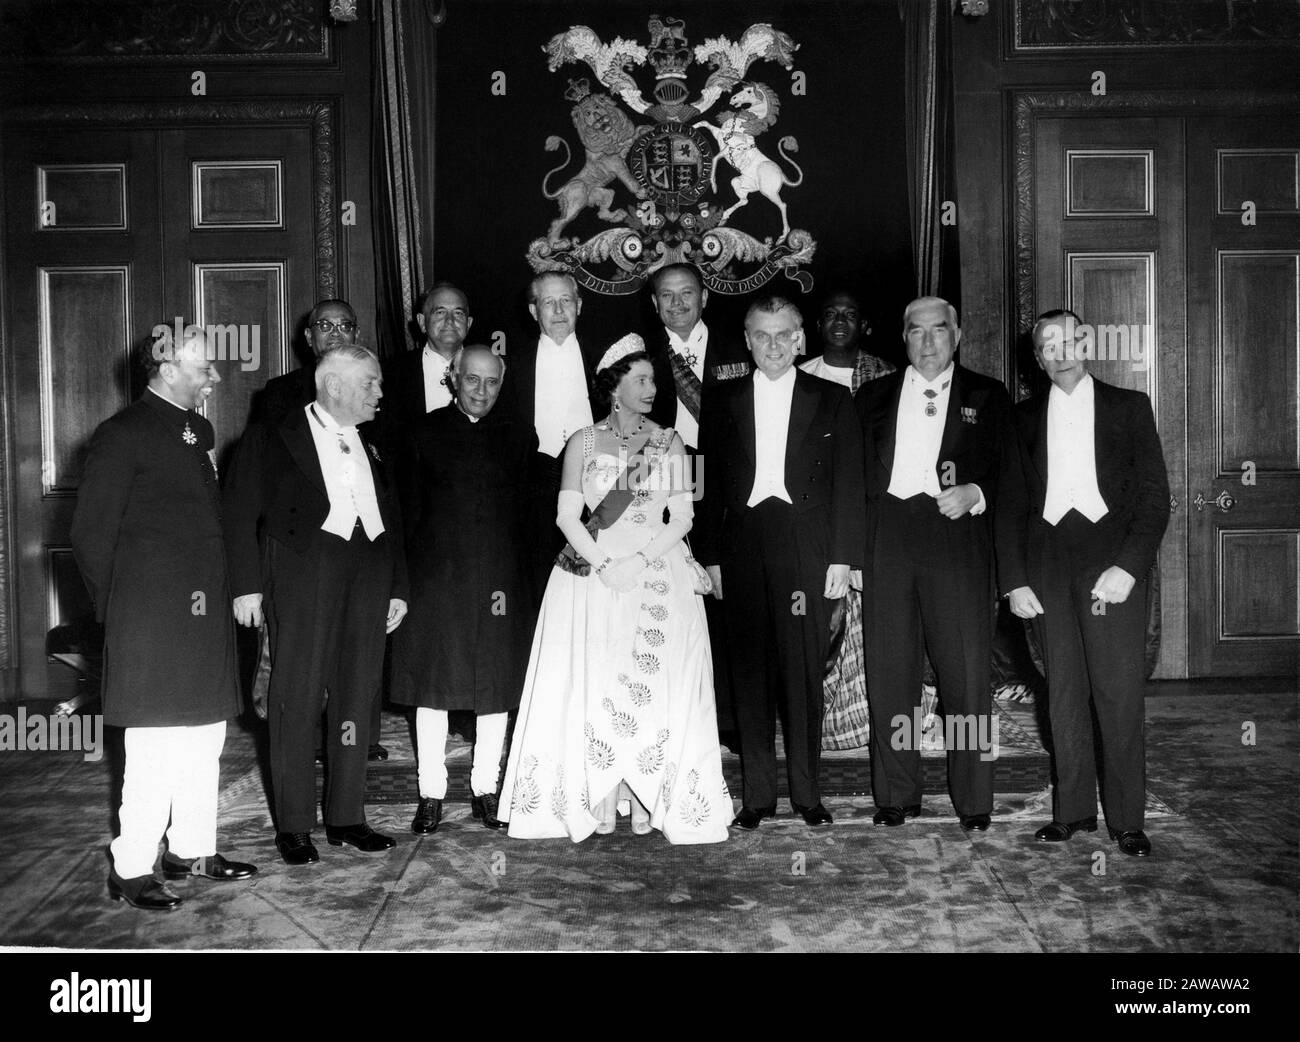 1960 , Windsor Castle , WINDSOR , GREAT BRITAIN : The  Queen ELIZABETH  II of England ( born 1926 ) at Windsor Castle  with the Prime Ministers of the Stock Photo